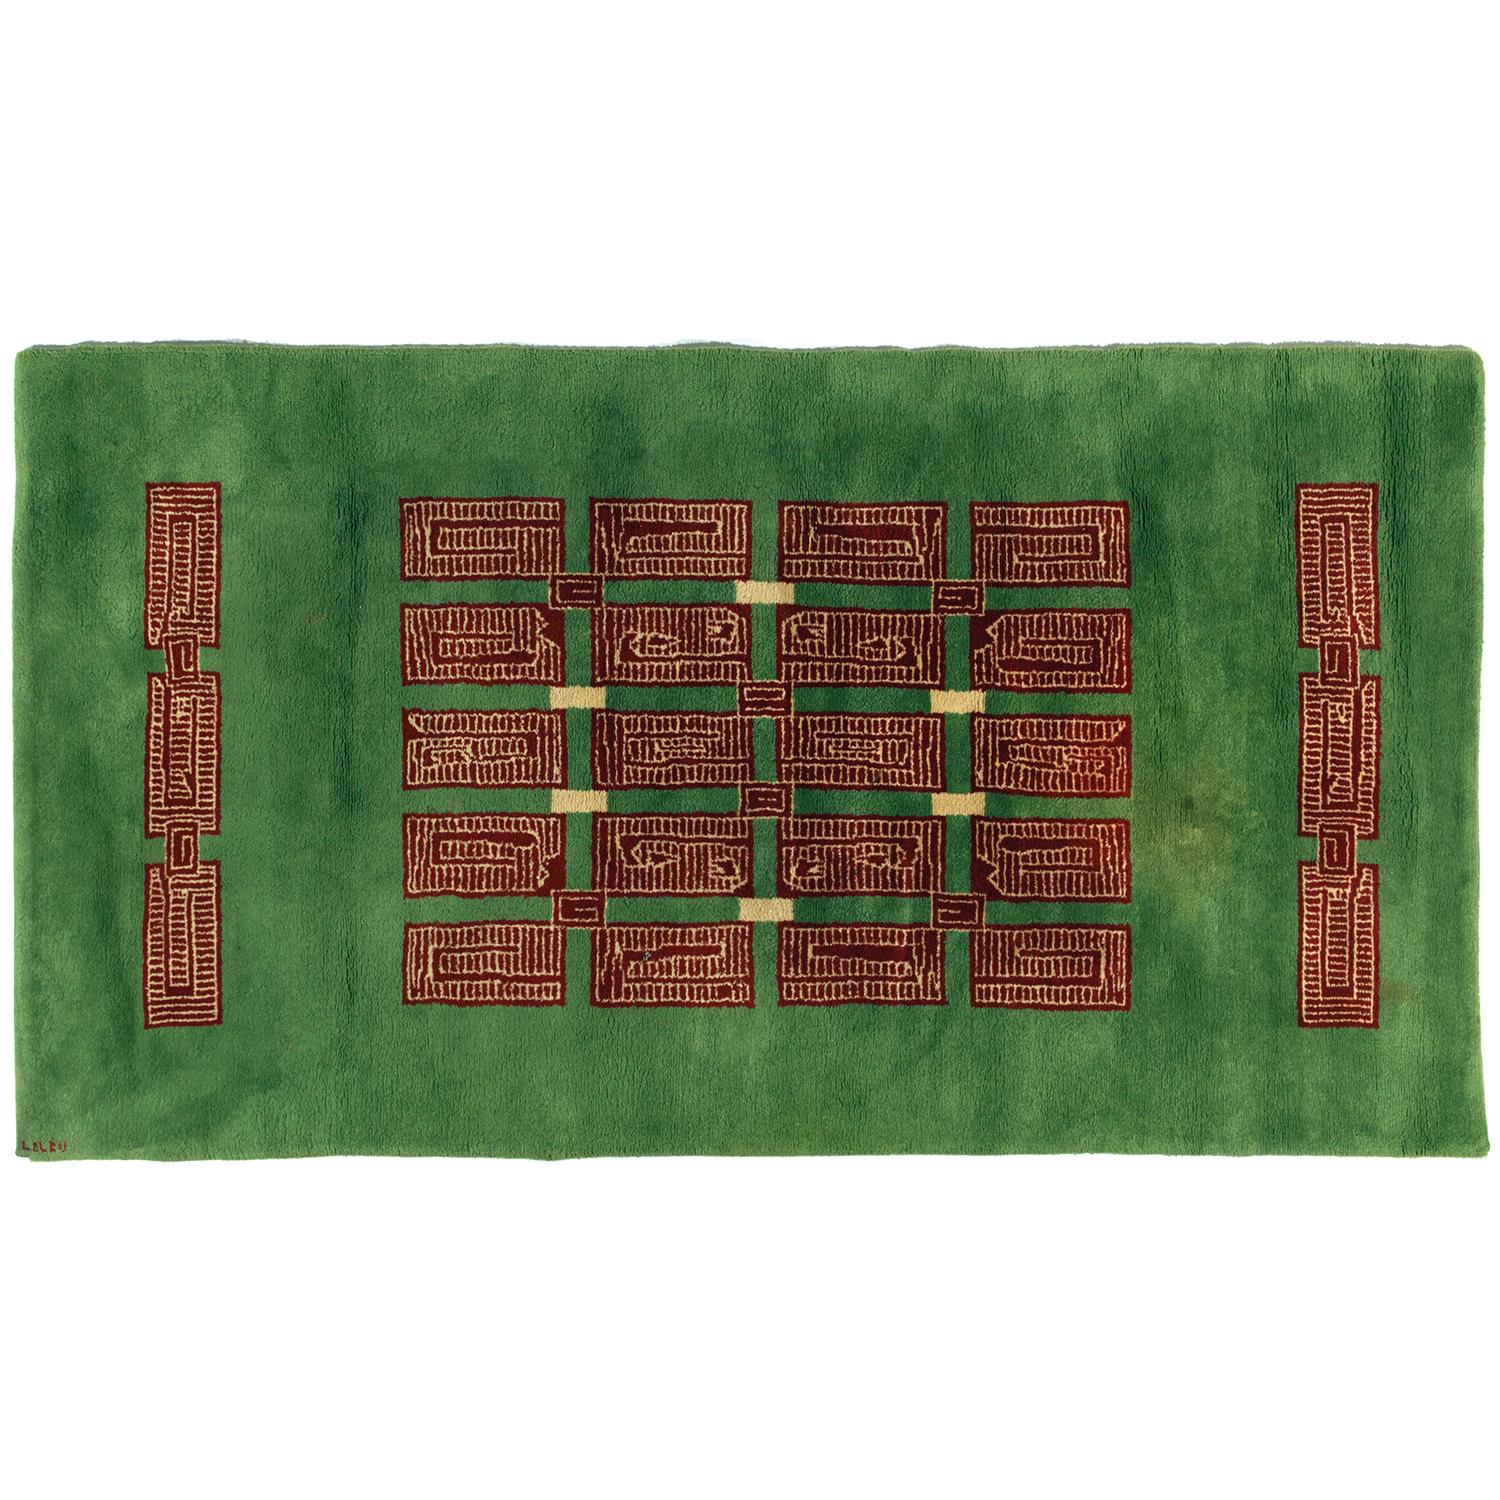 A Large knotted woollen rug with green ground, central decoration forming a geometric composition with brown and sand Aztec designs. Later lining in jute canvas. Signed 